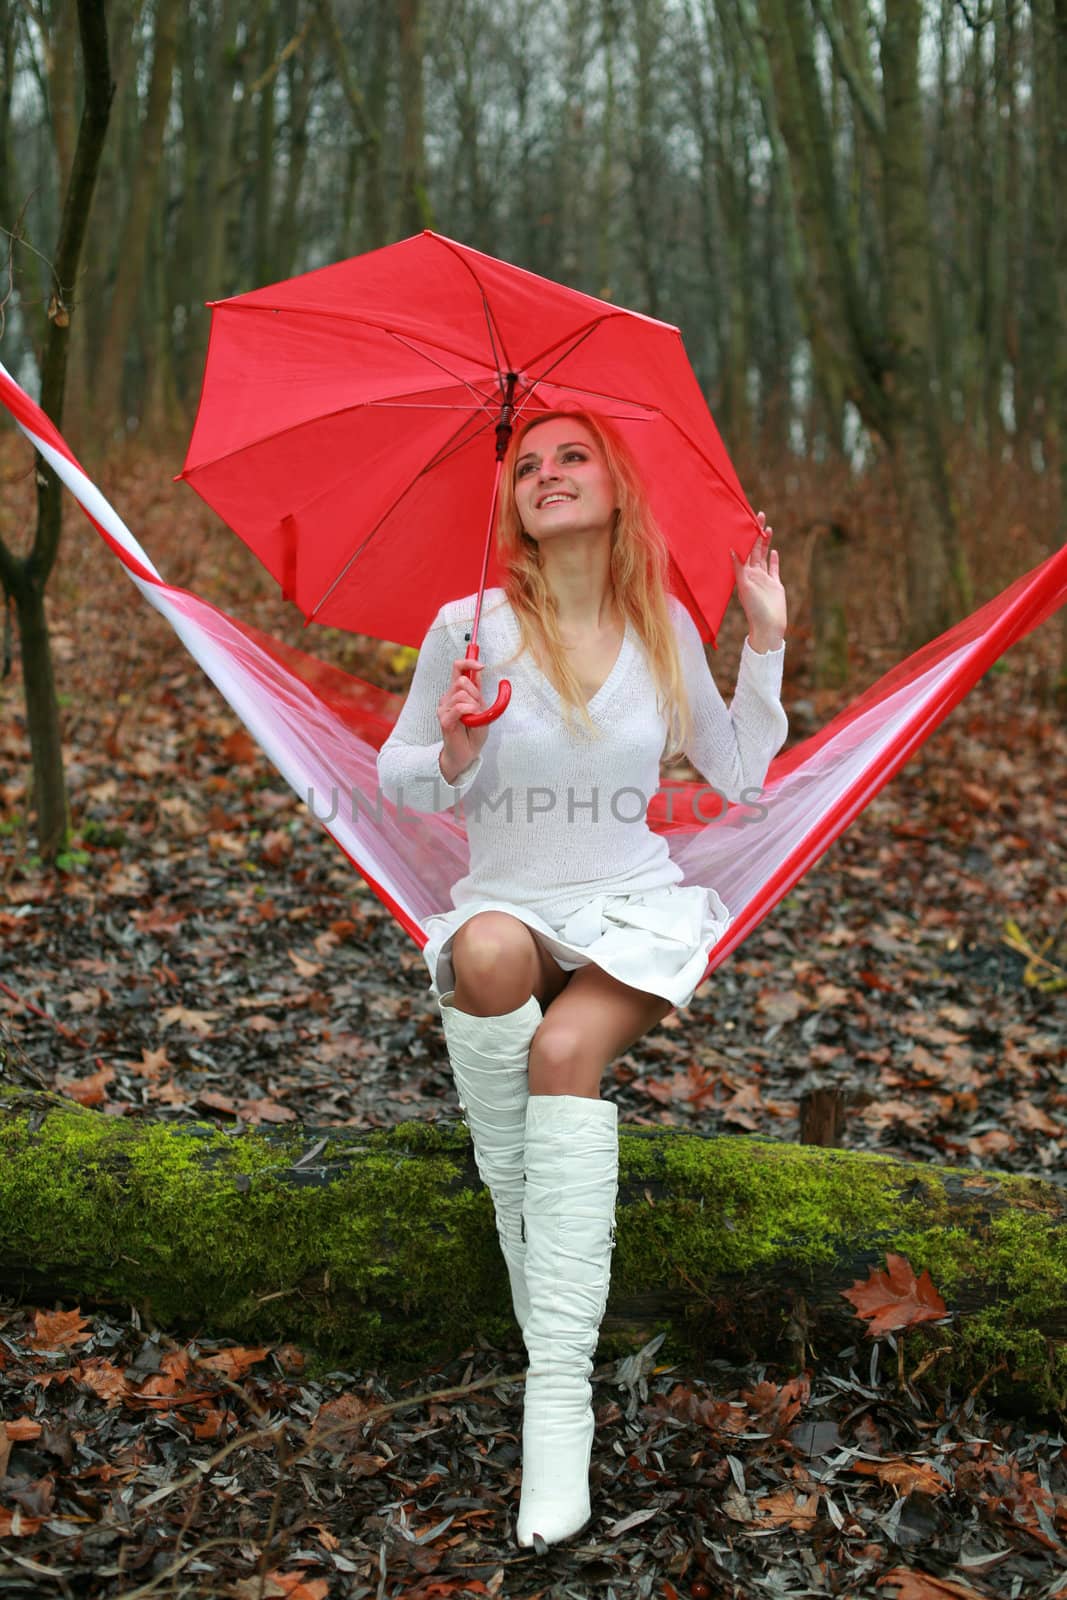 An image of happy girl with red umbrella